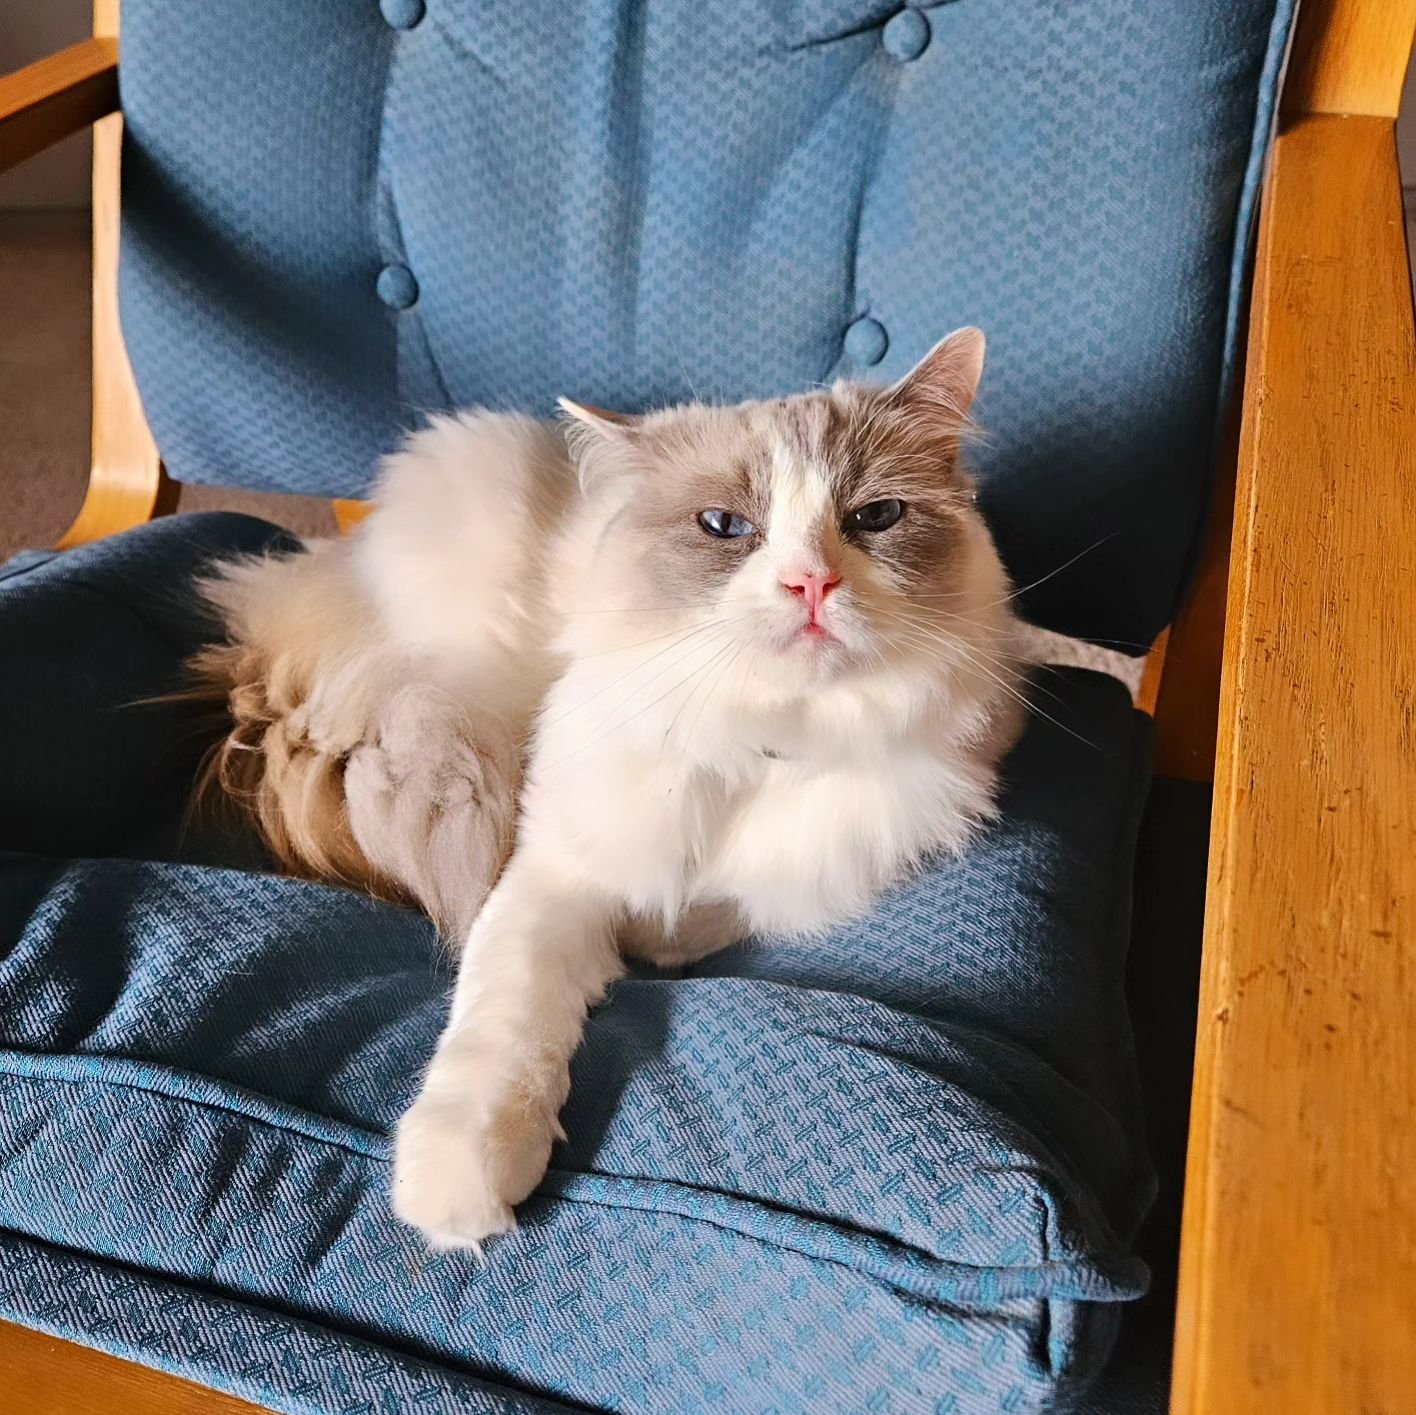 I've been too busy to make videos lately- so here's a picture of my client's cat! She's a Rag Doll named Lucy- so pretty, gentle and loves to be held! 😻

#ragdollcat #catsofinstagram